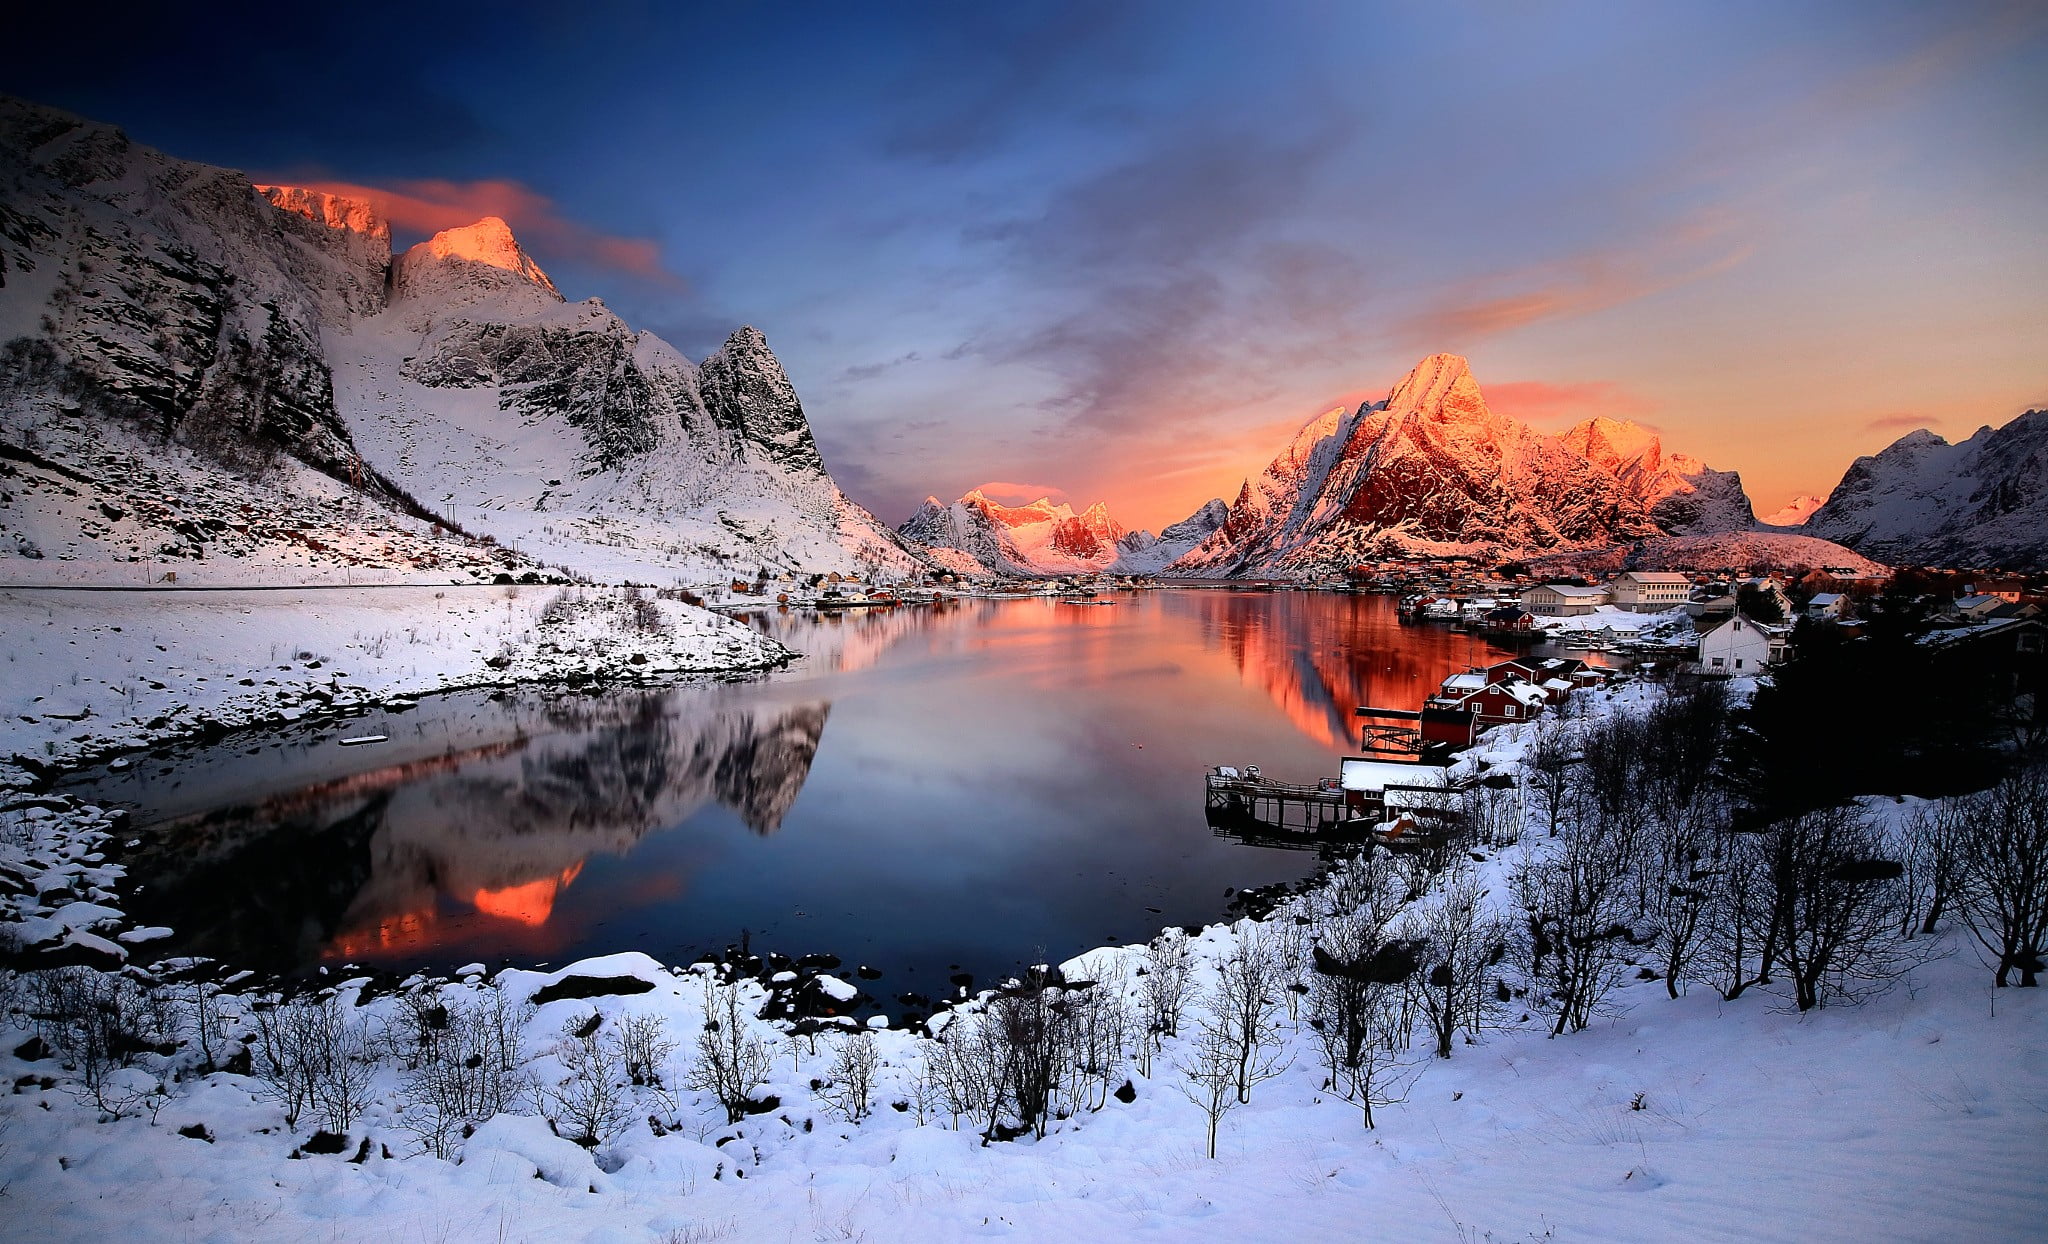 Landscape Photography Of Body Of Water Surrounded With Mountains Norway Winter Nature Landscape Hd Wallpaper Wallpaper Flare